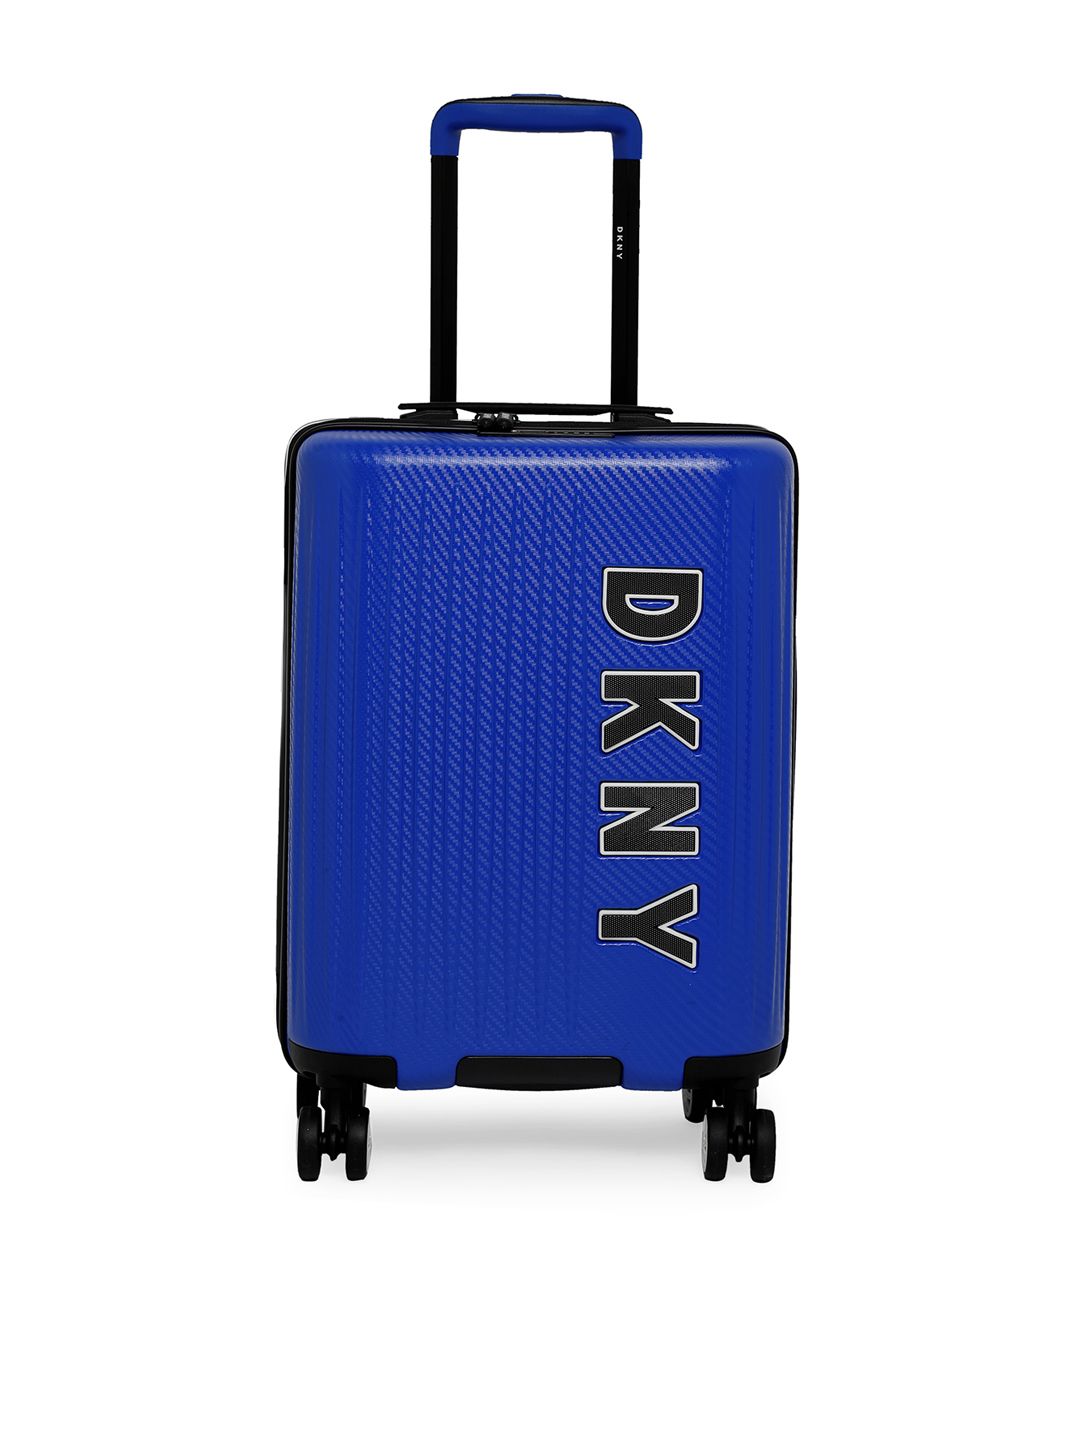 DKNY Blue Textured BLAZE HS Hard-Sided Medium Trolley Suitcase Price in India